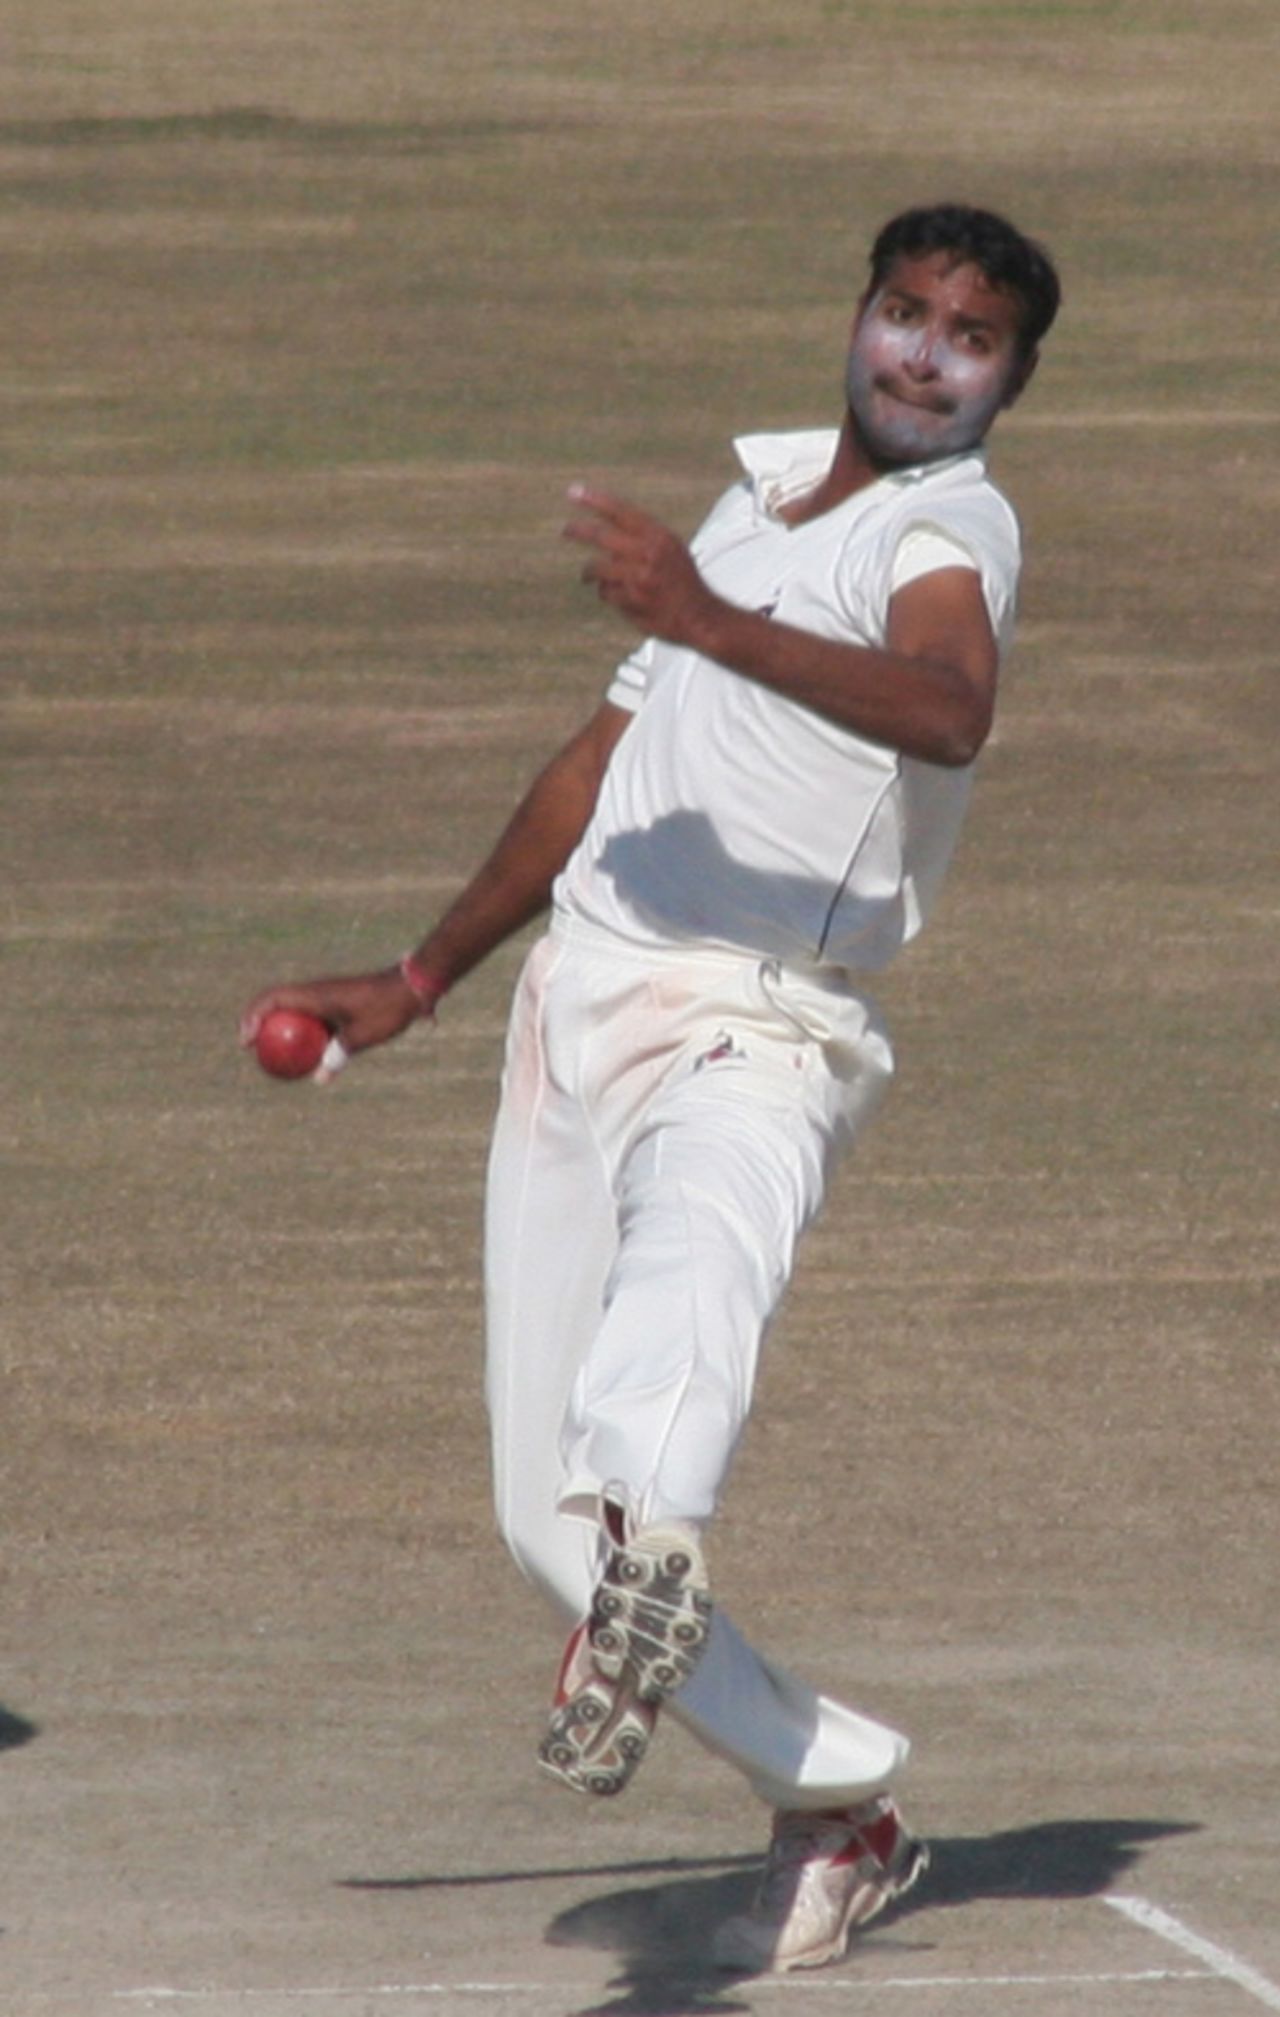 Sumit Mathur in his delivery stride, Himachal Pradesh v Rajasthan, Ranji Trophy Super League, Group A, 7th round, 3rd day, Dharamsala, December 27, 2007 